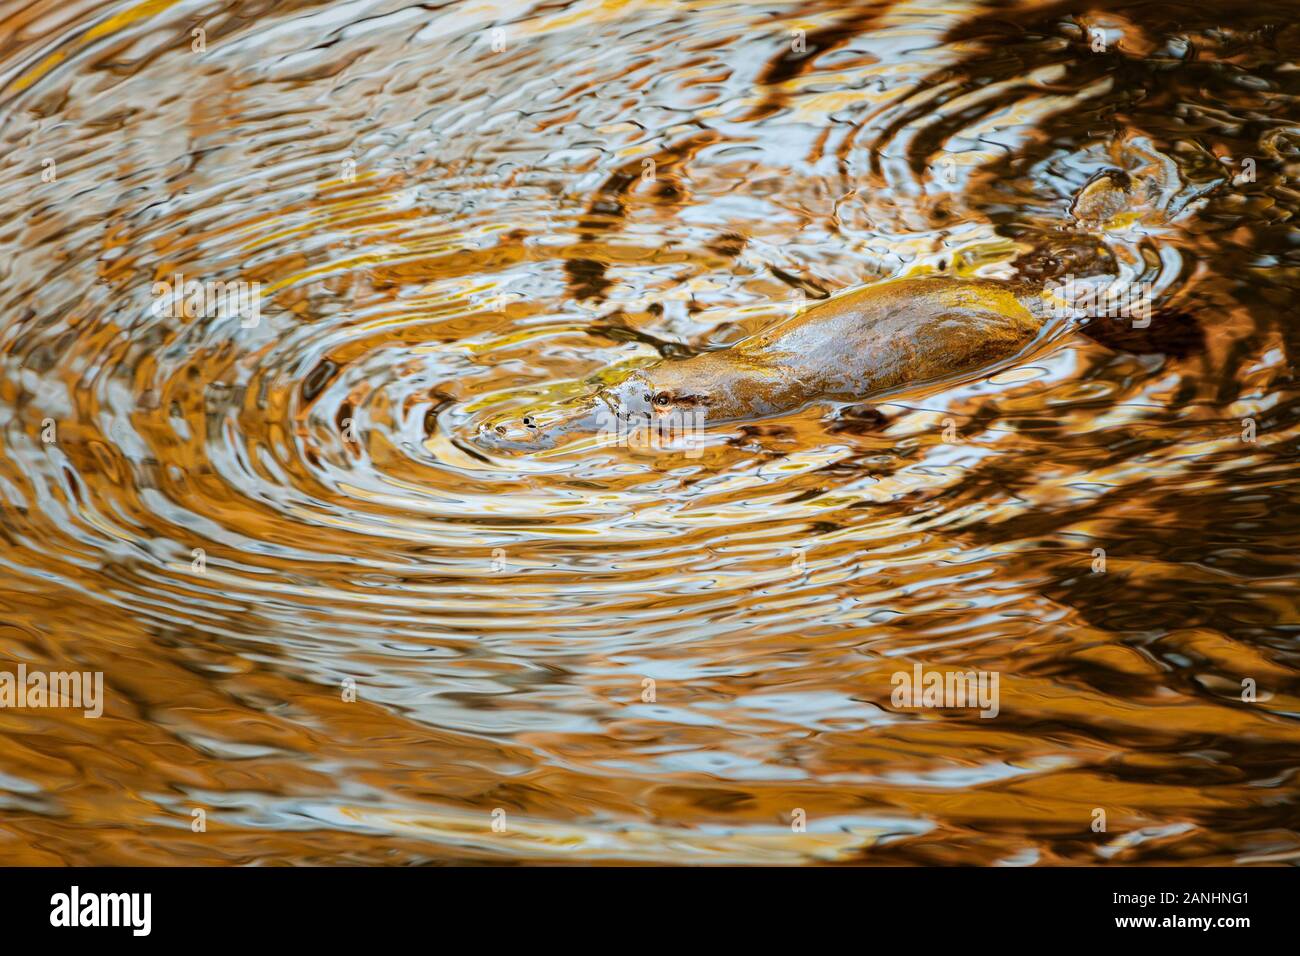 Platypus in golden waters of evening reflections. Stock Photo